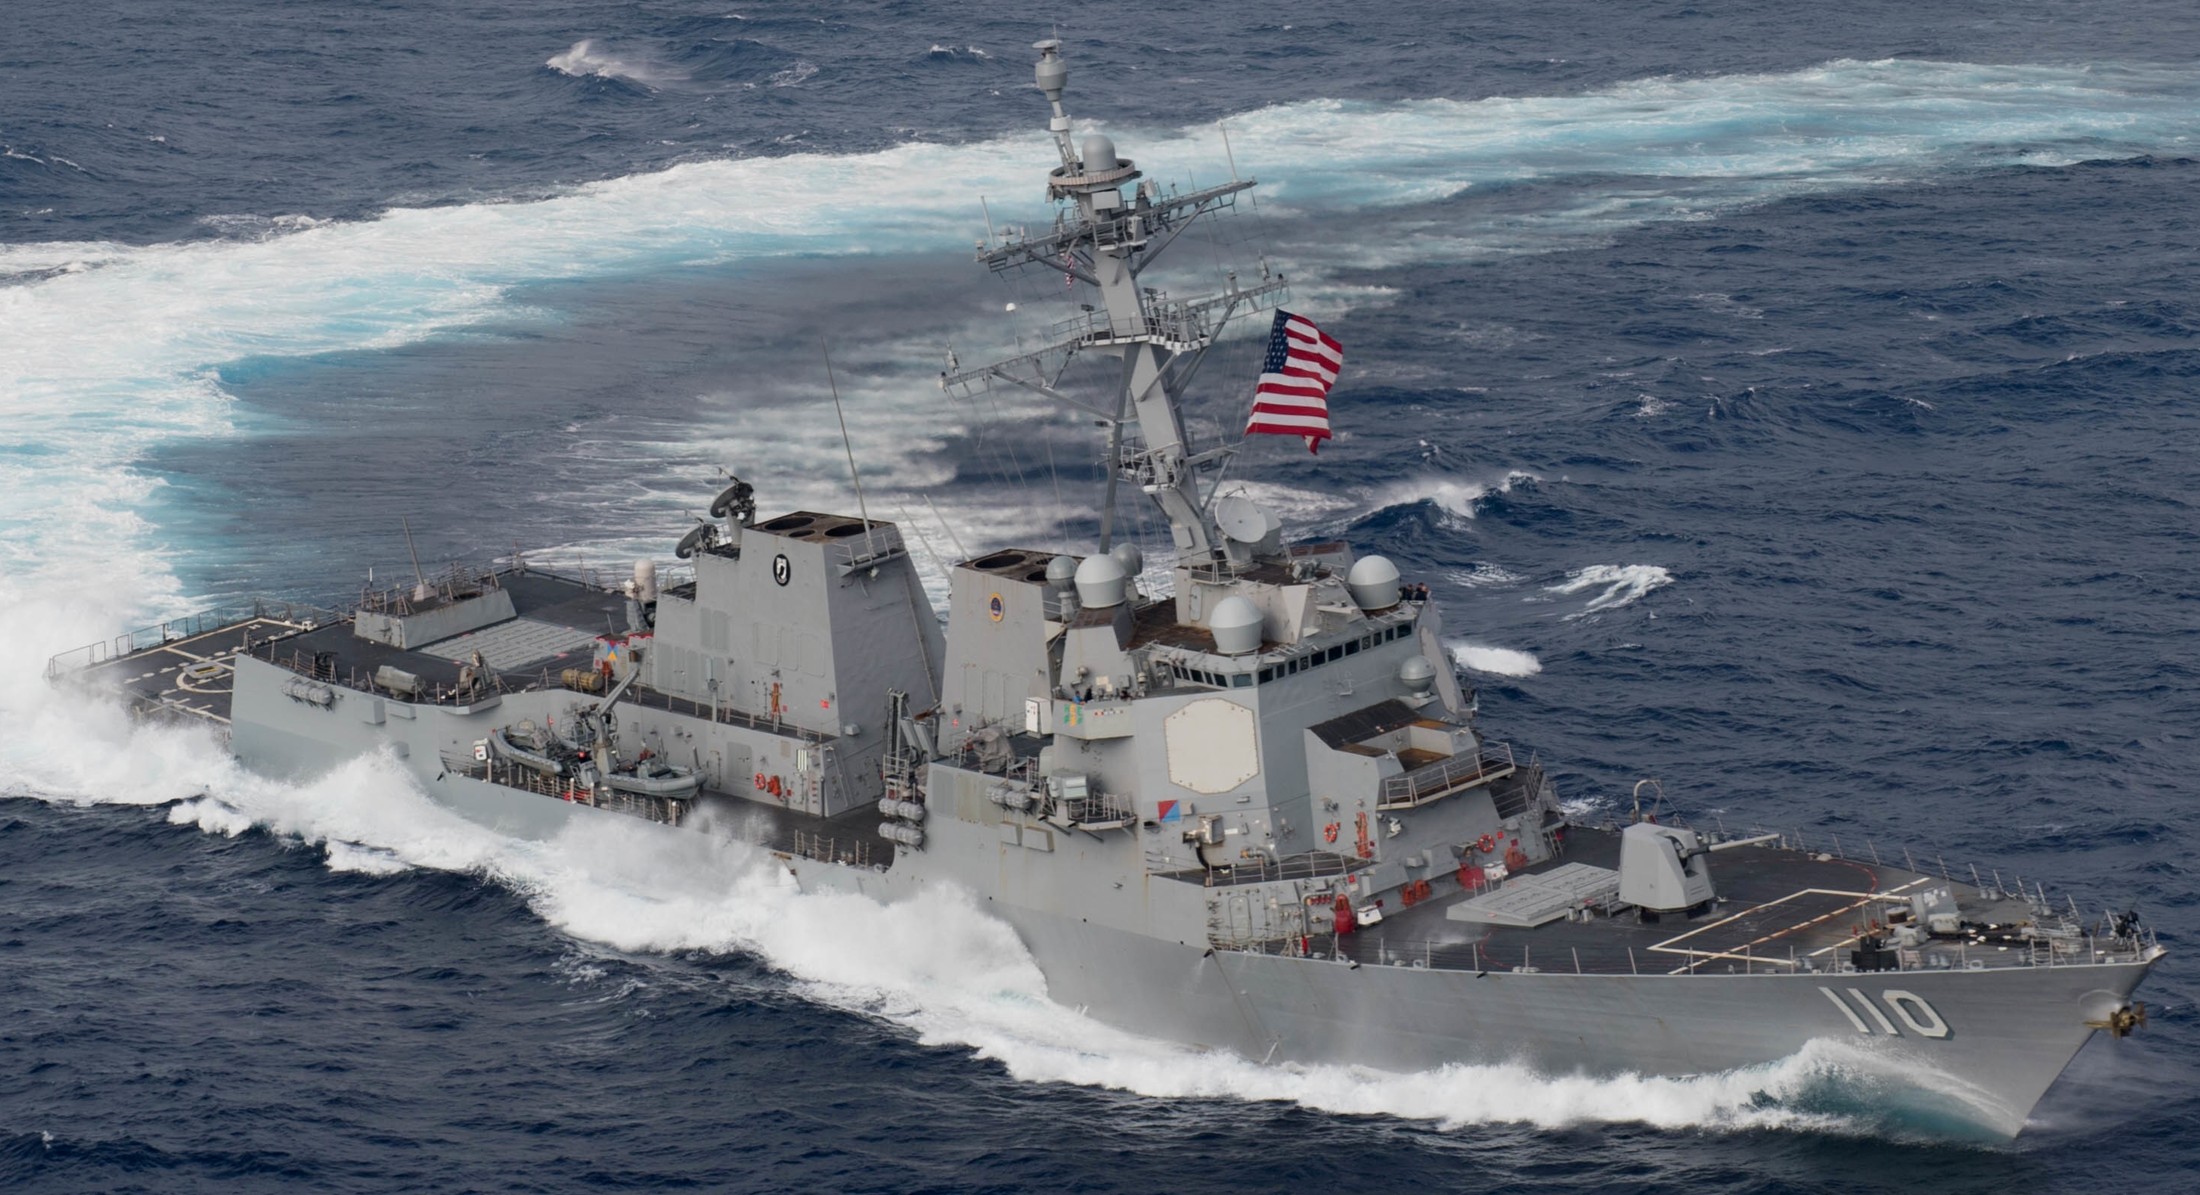 ddg-110 uss william p. lawrence arleigh burke class guided missile destroyer aegis us navy ingalls pearl harbor 36x